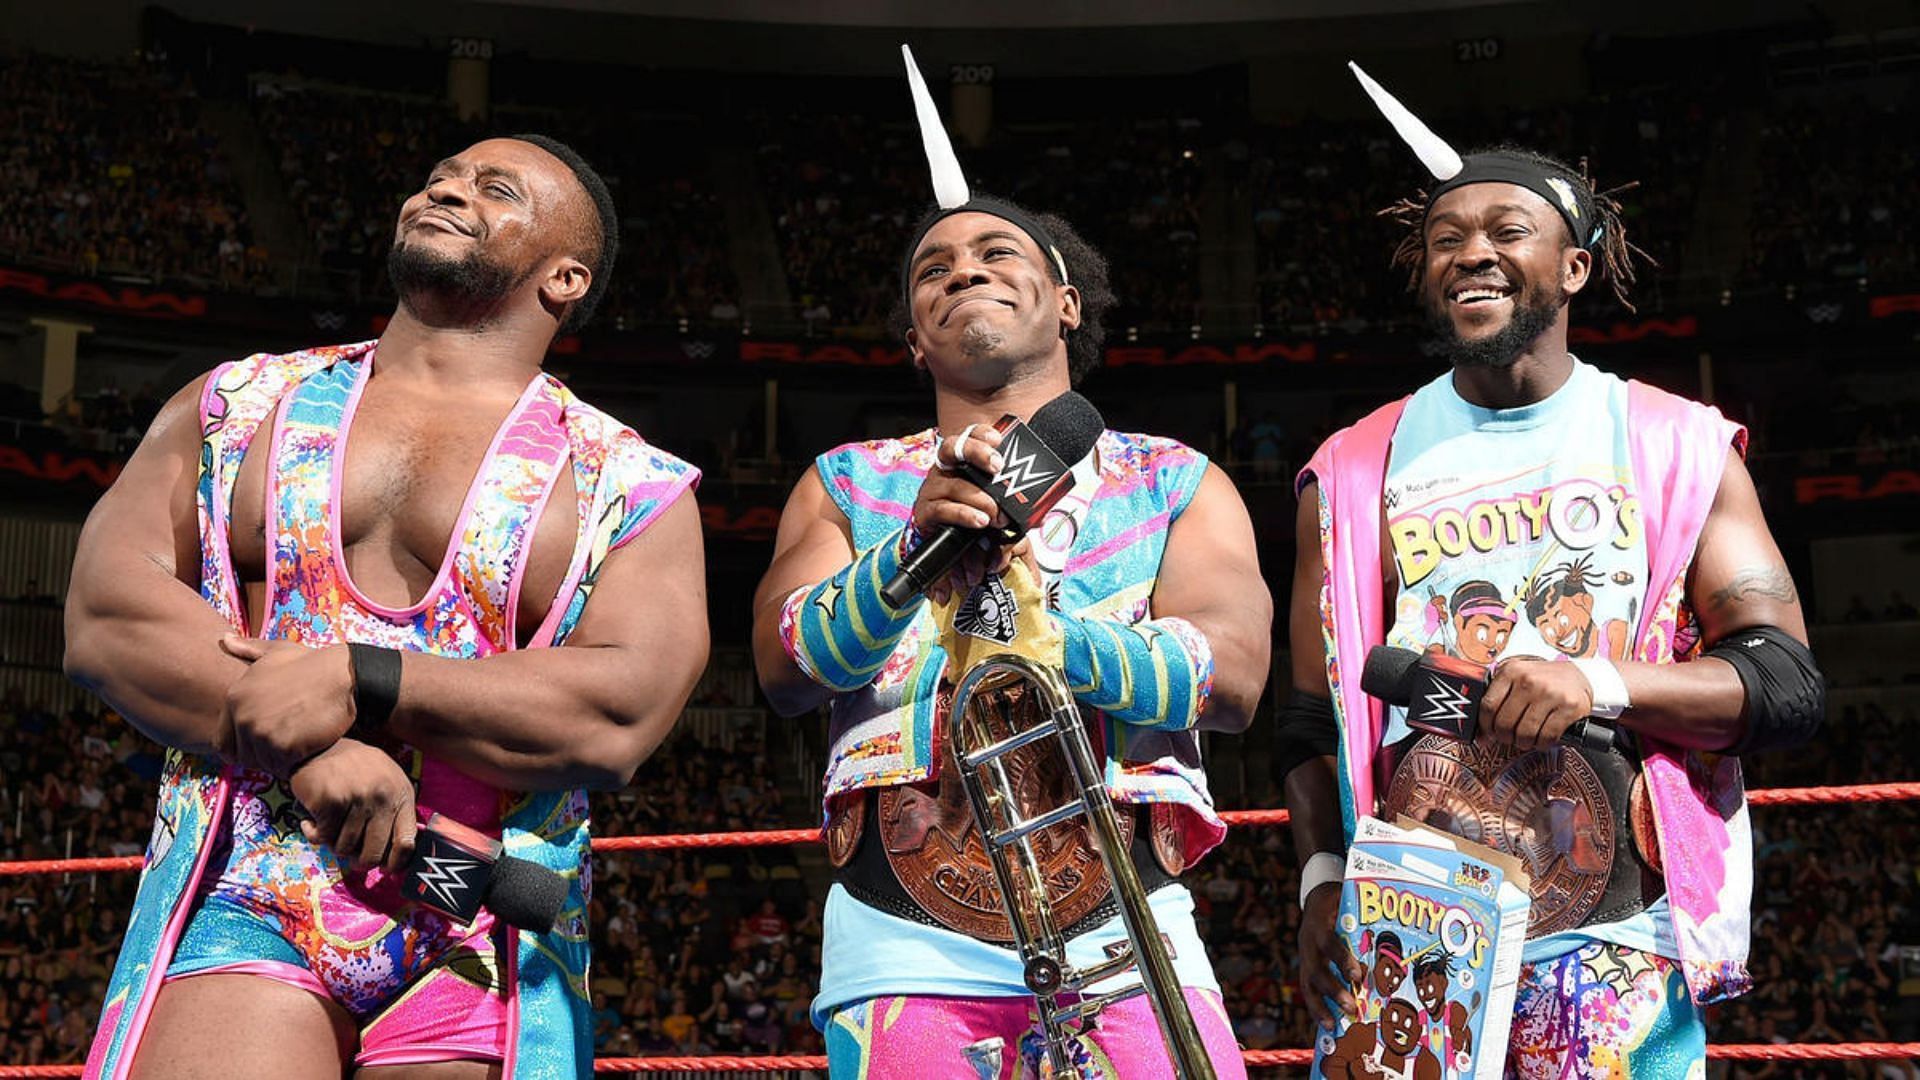 Big E is a superstar synonymous with The New Day